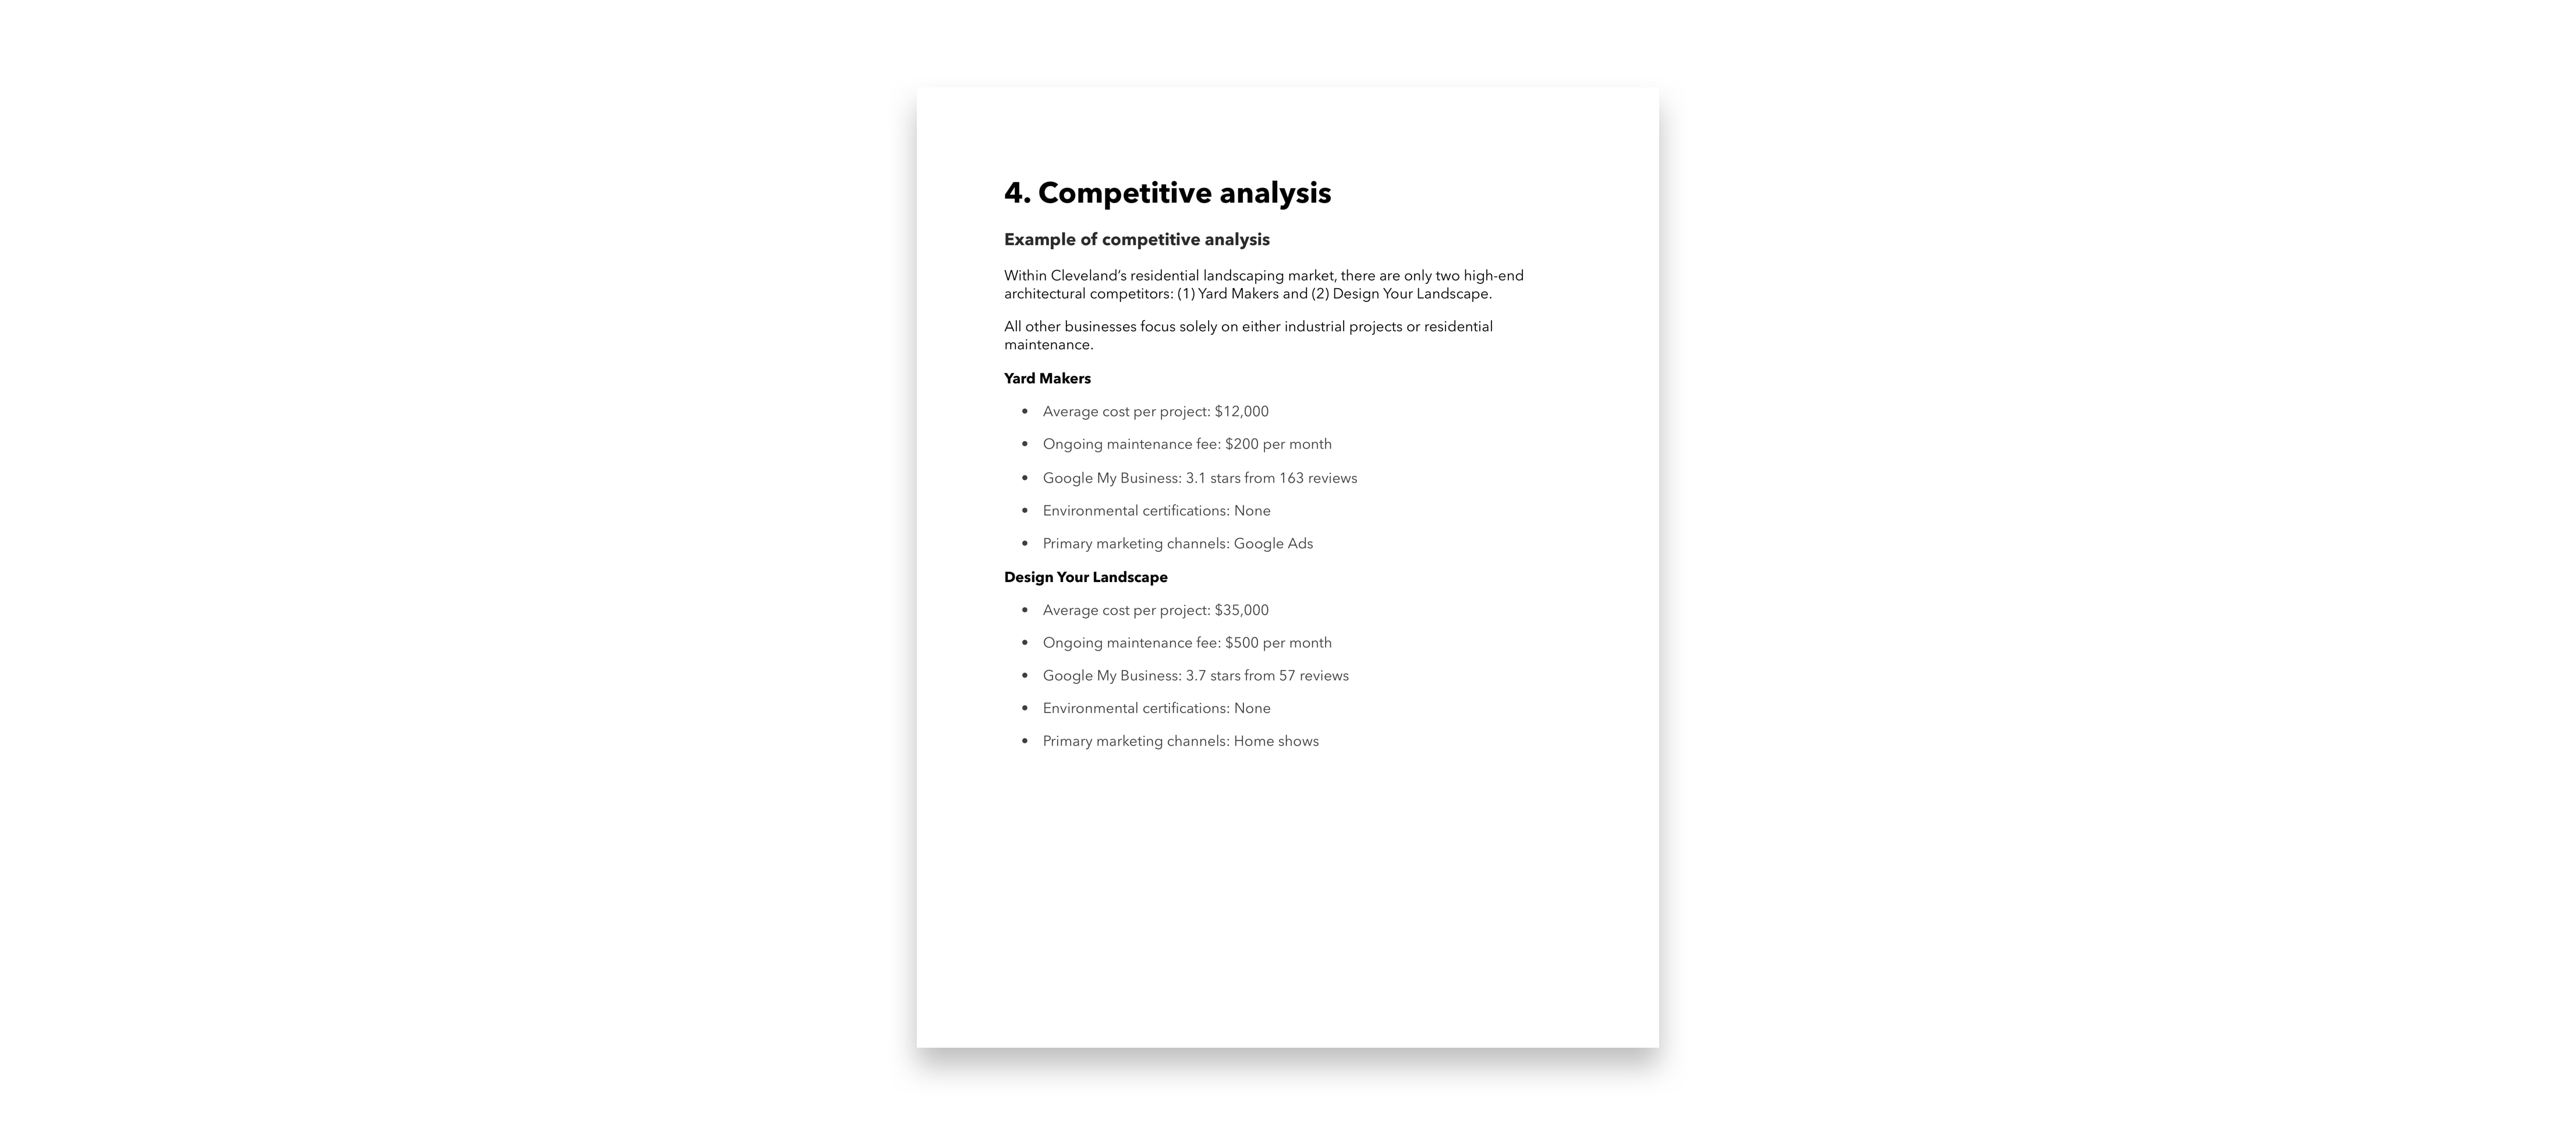 An example of competitor analysis as part of a business plan.